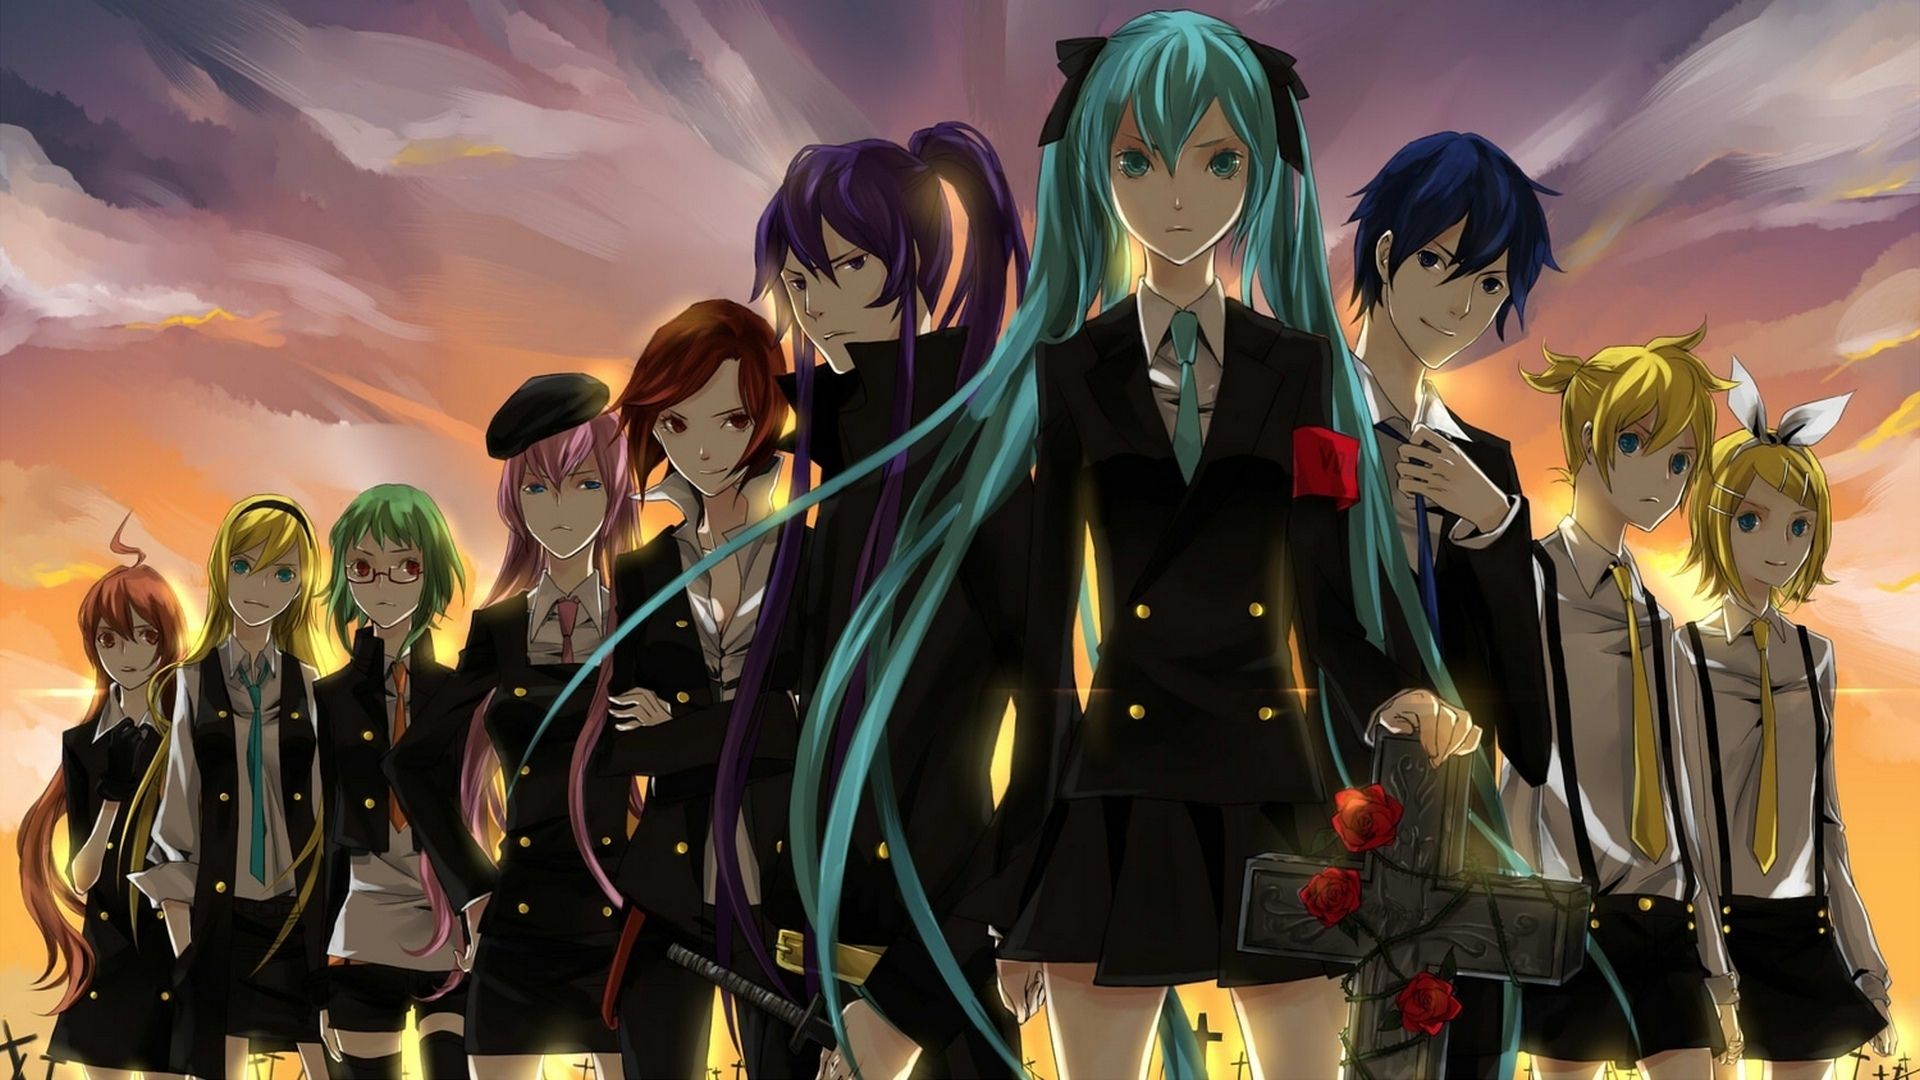 Vocaloid wallpaper 1920x1080 for android 50 images - 